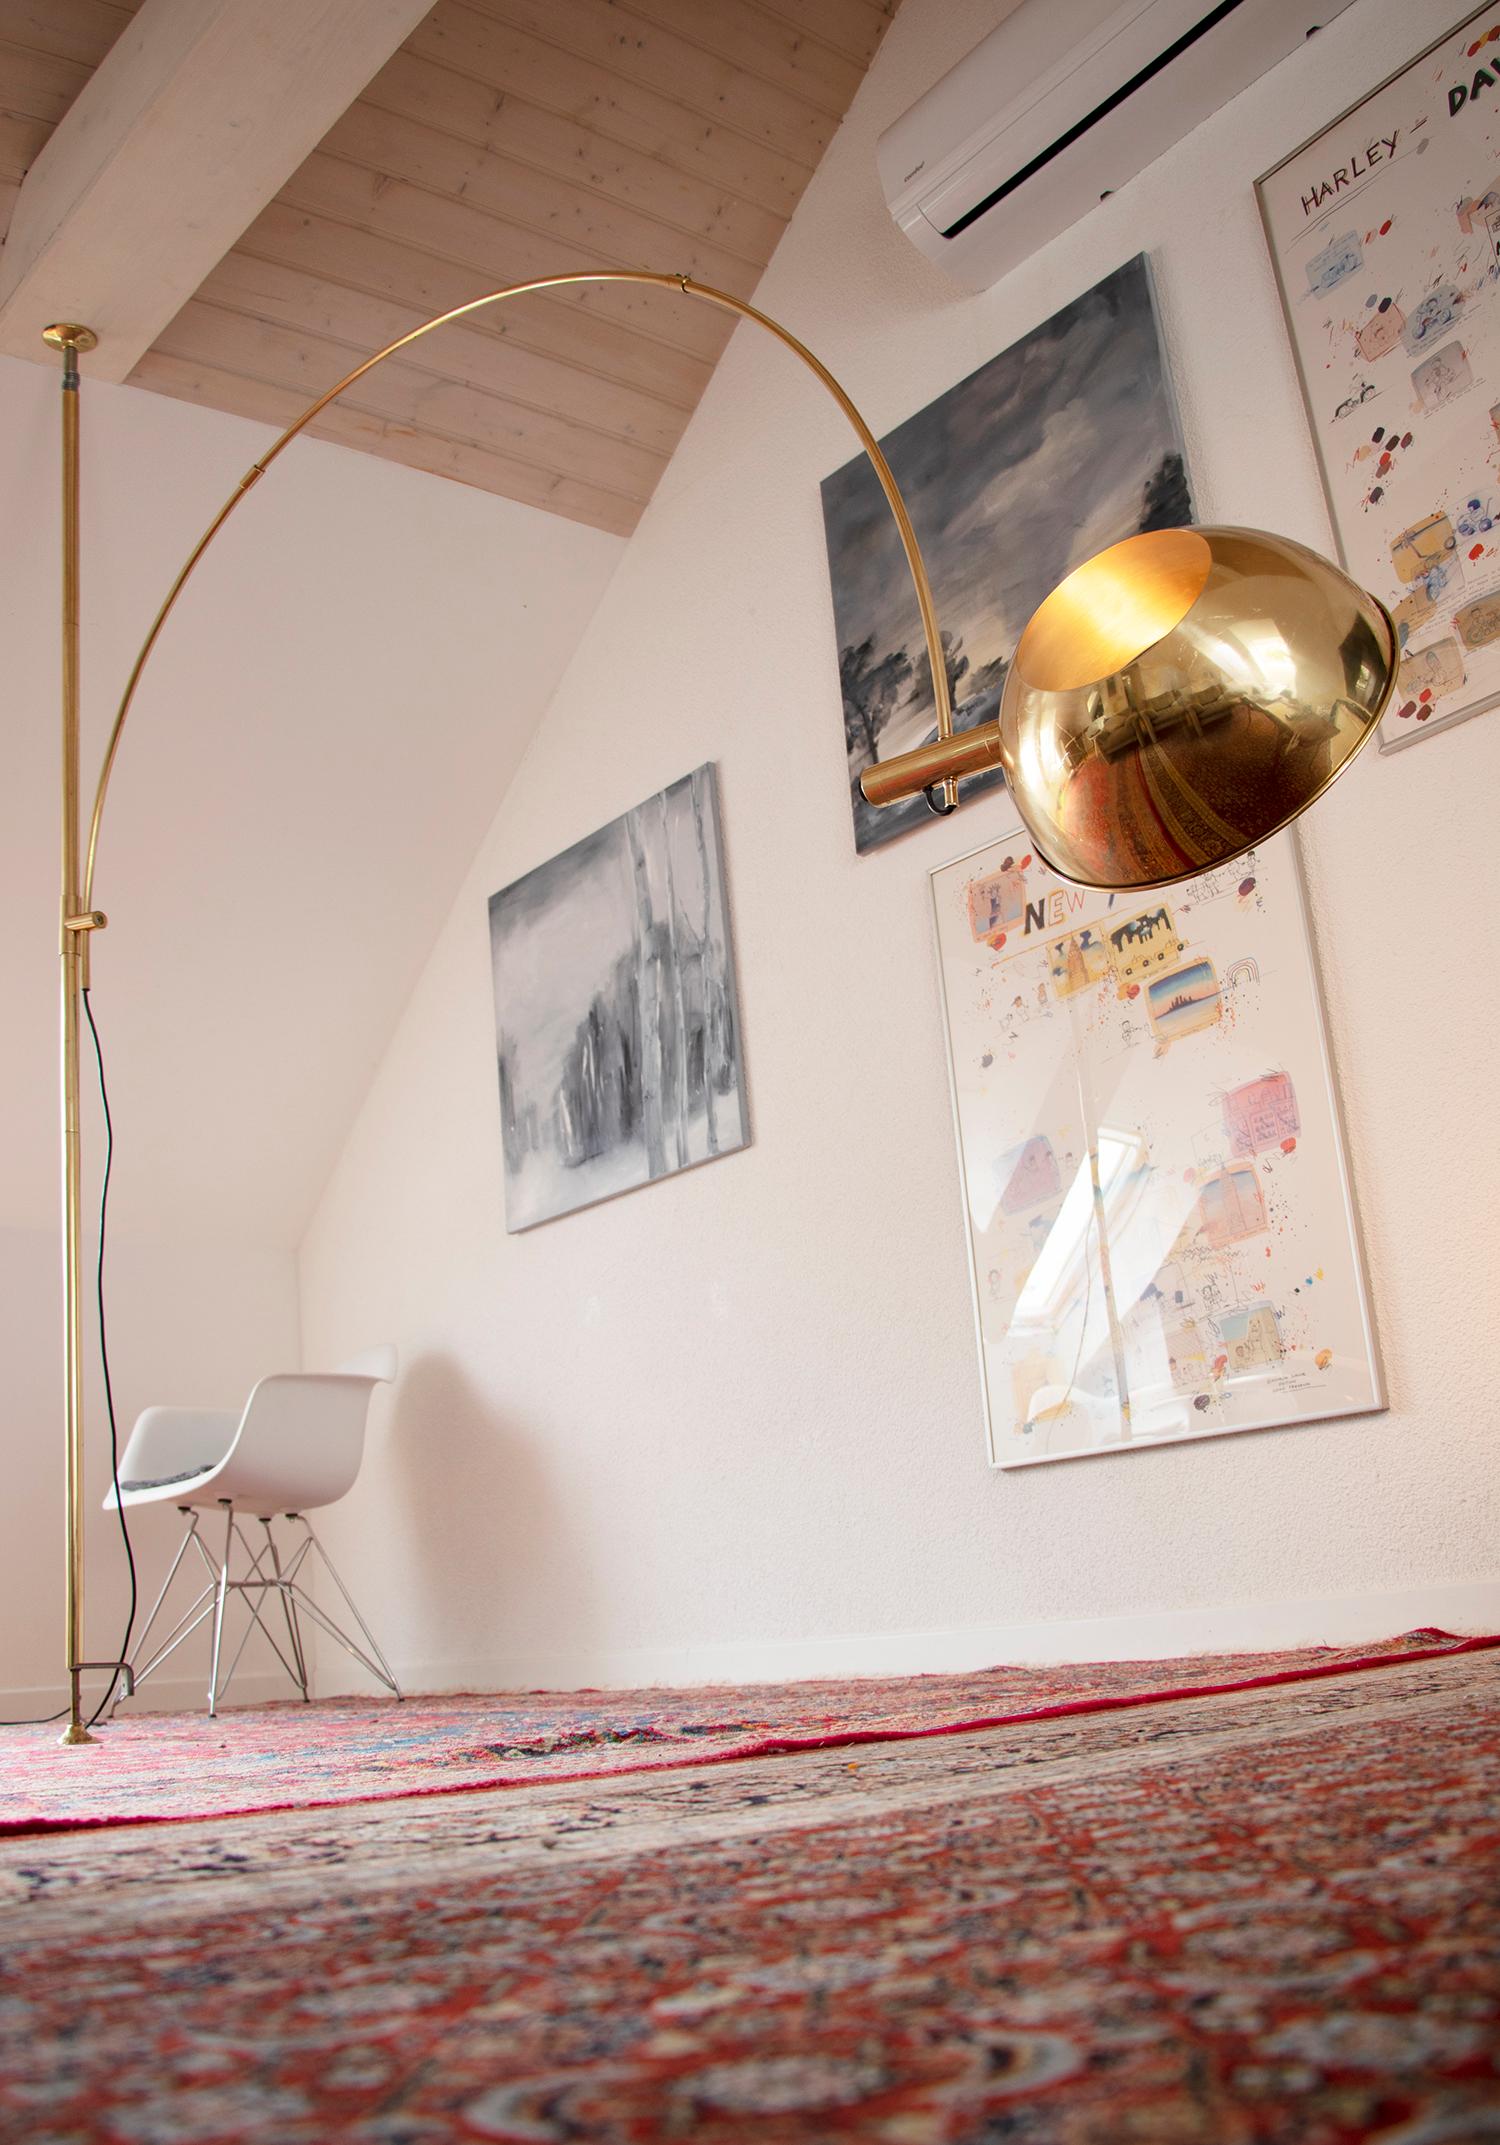 
Adjustable floor-to-ceiling polished brass light by Florian Schulz / Licht und Objekt made in Germany in the 1960-70s. Made for the eternity! 

The lamp is well-constructed and of extremely high quality (made in Germany) and, despite series